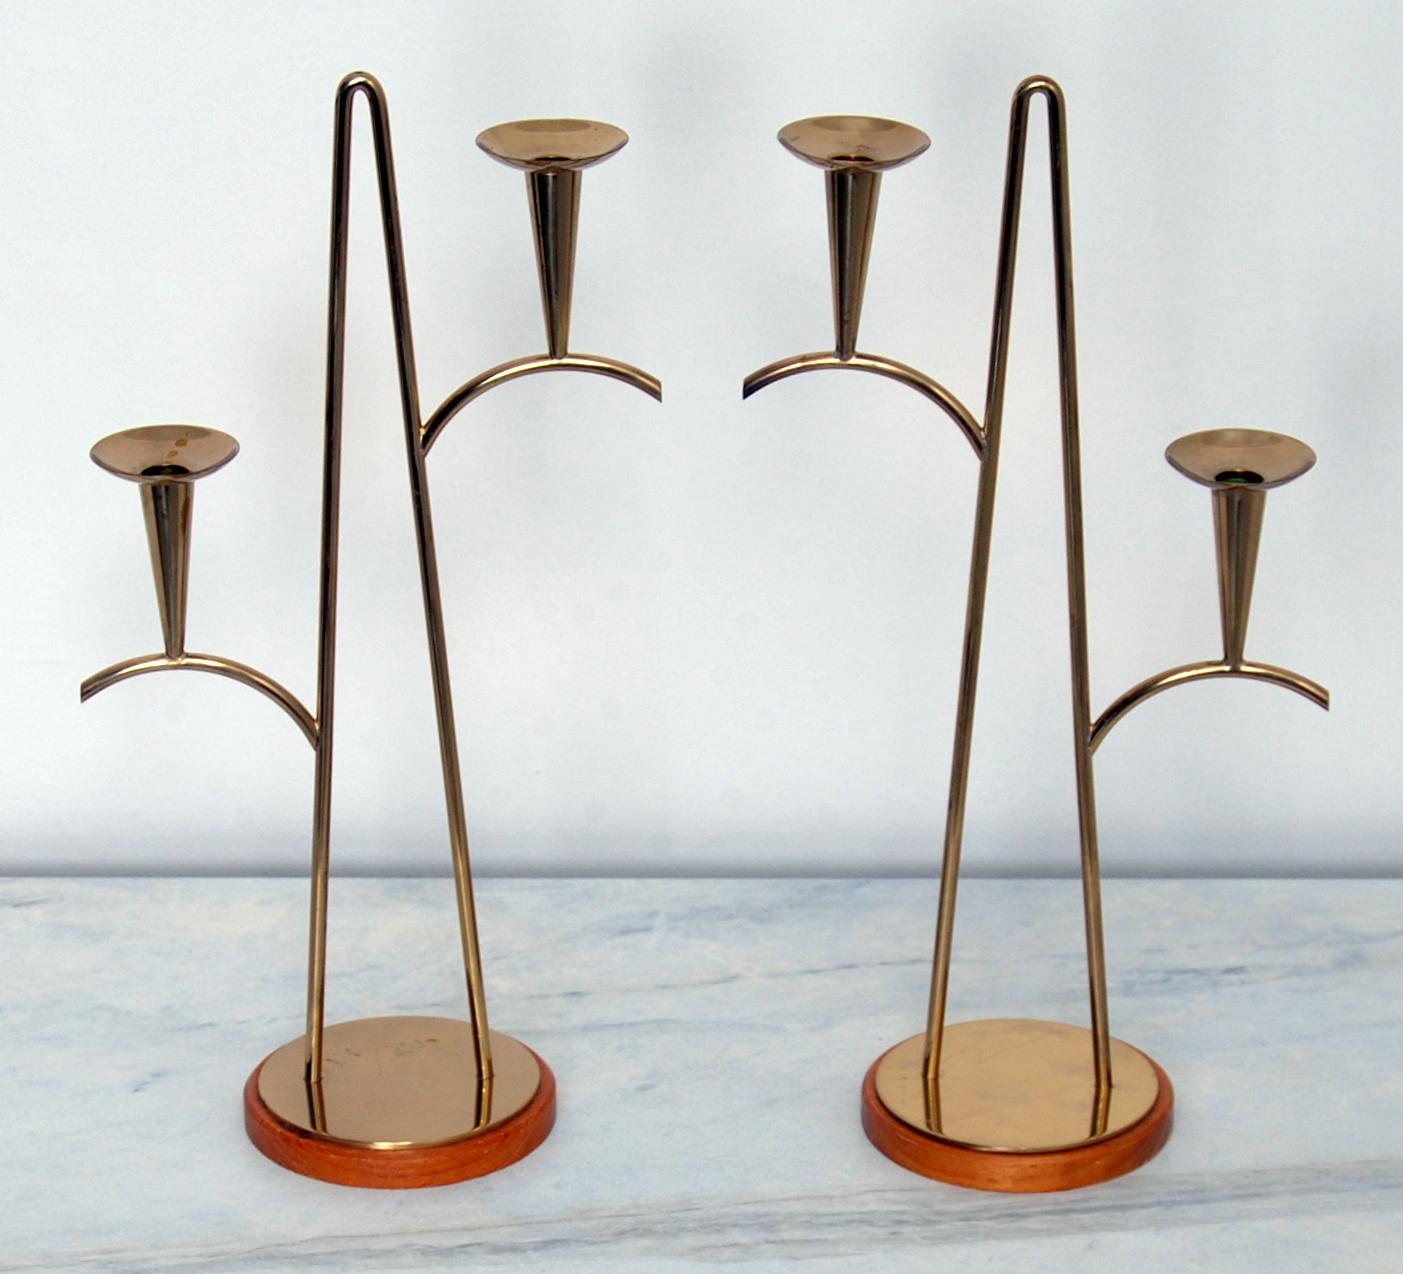 Pair of brass candleholders for smaller candles on wooden sockets. Designed by Gunnar Ander for Ystad Metall. Stamped ”Ystad Metall Made In Sweden” in sockets.
   